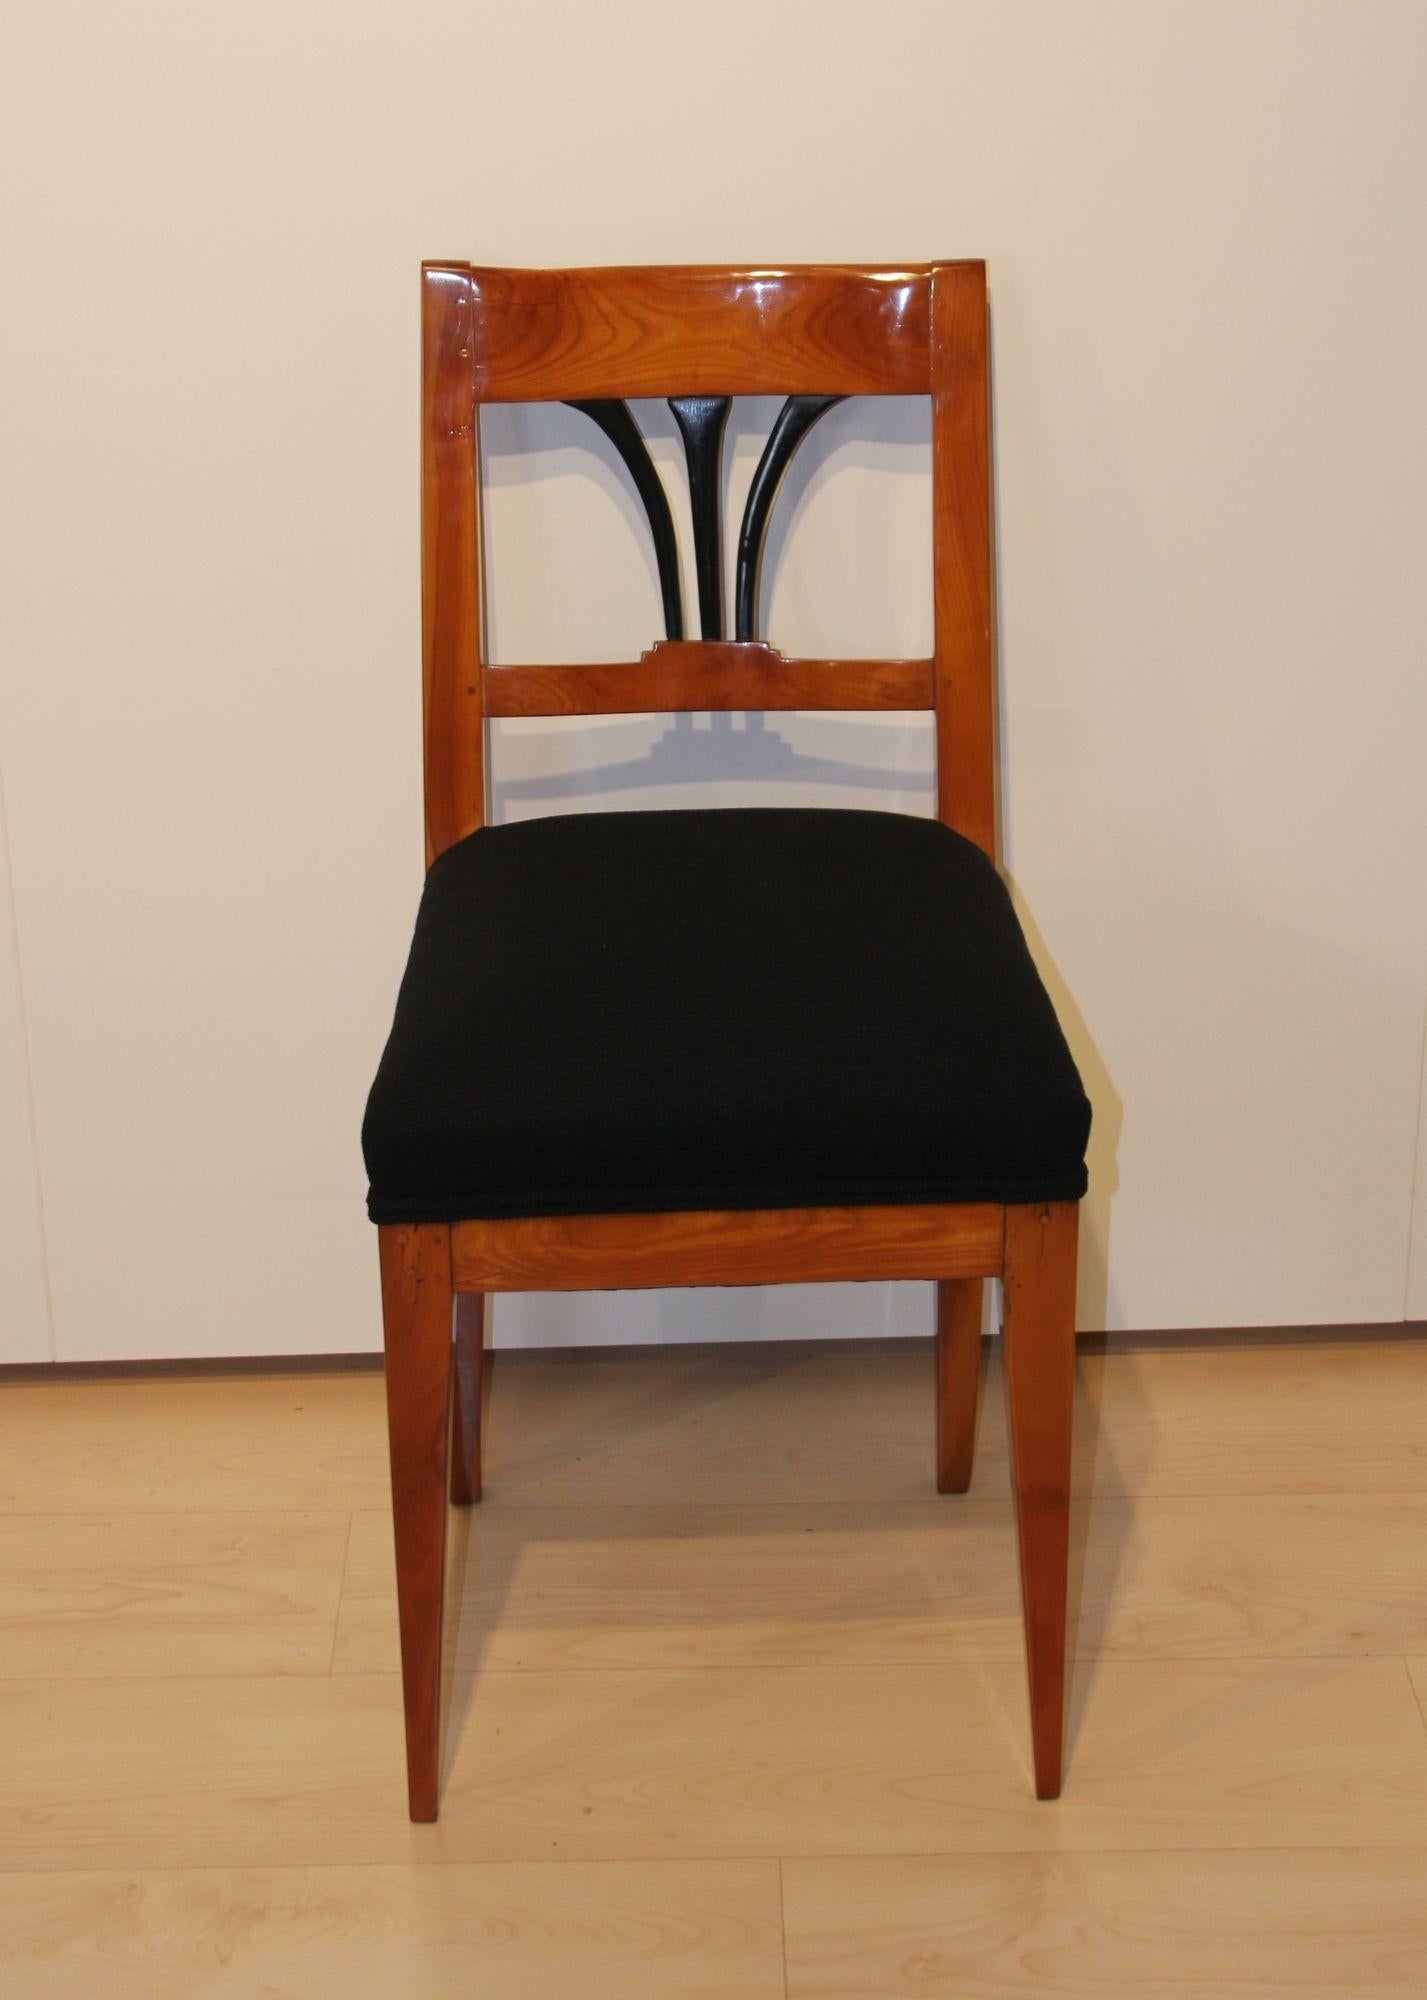 Biedermeier Side Chair, Cherry Wood, South Germany circa 1830
 
Solid cherry wood. Restored and hand polished with shellac.
Back decoration of three ebonized leaves.
New upholstered with black structured fabric and double keder.
 
Dimensions: H 86